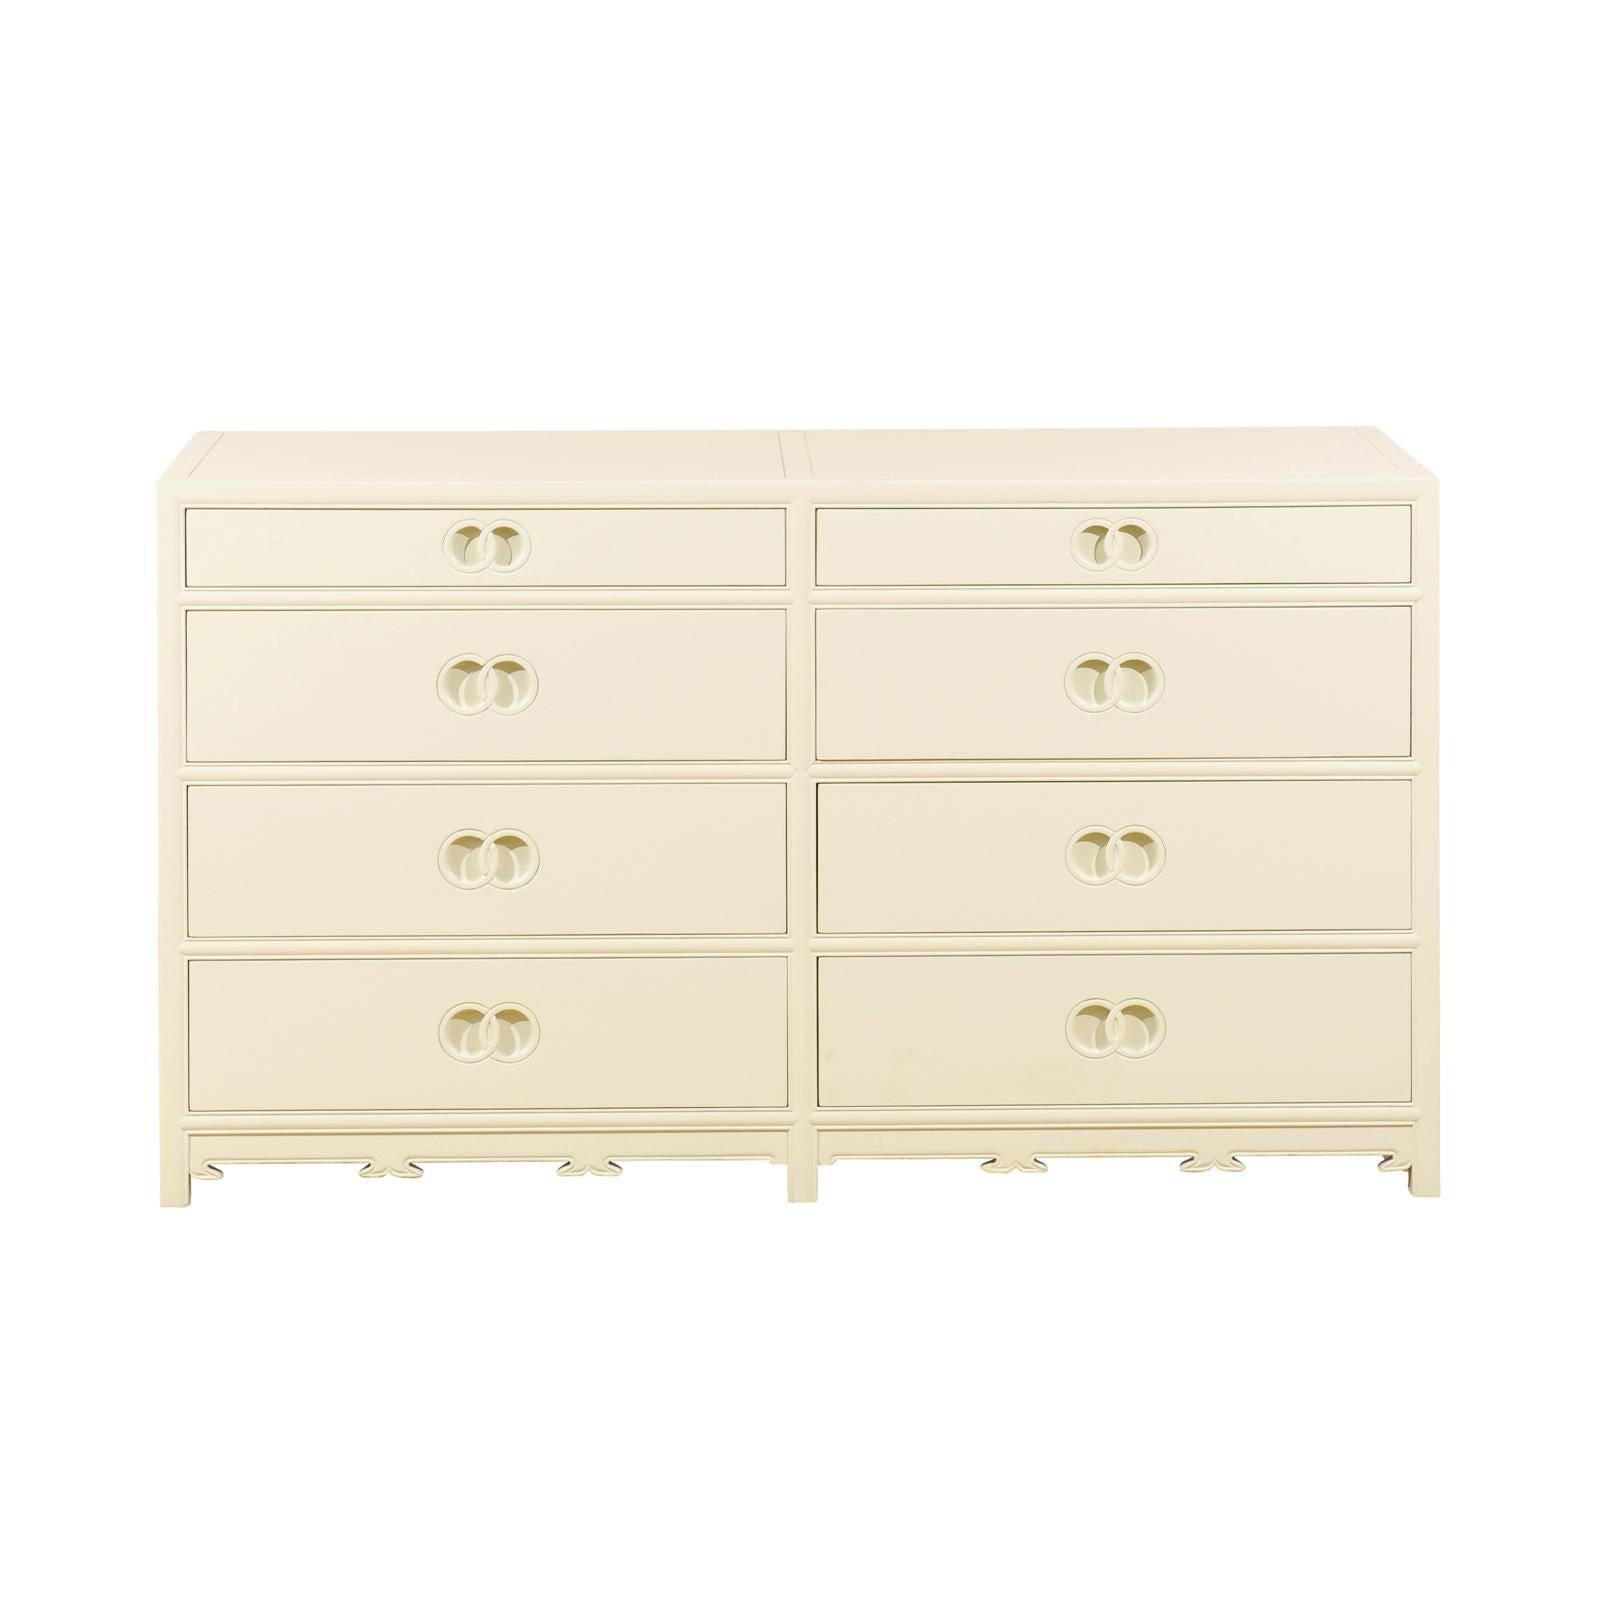 Is there a difference between a dresser and a chest of drawers?